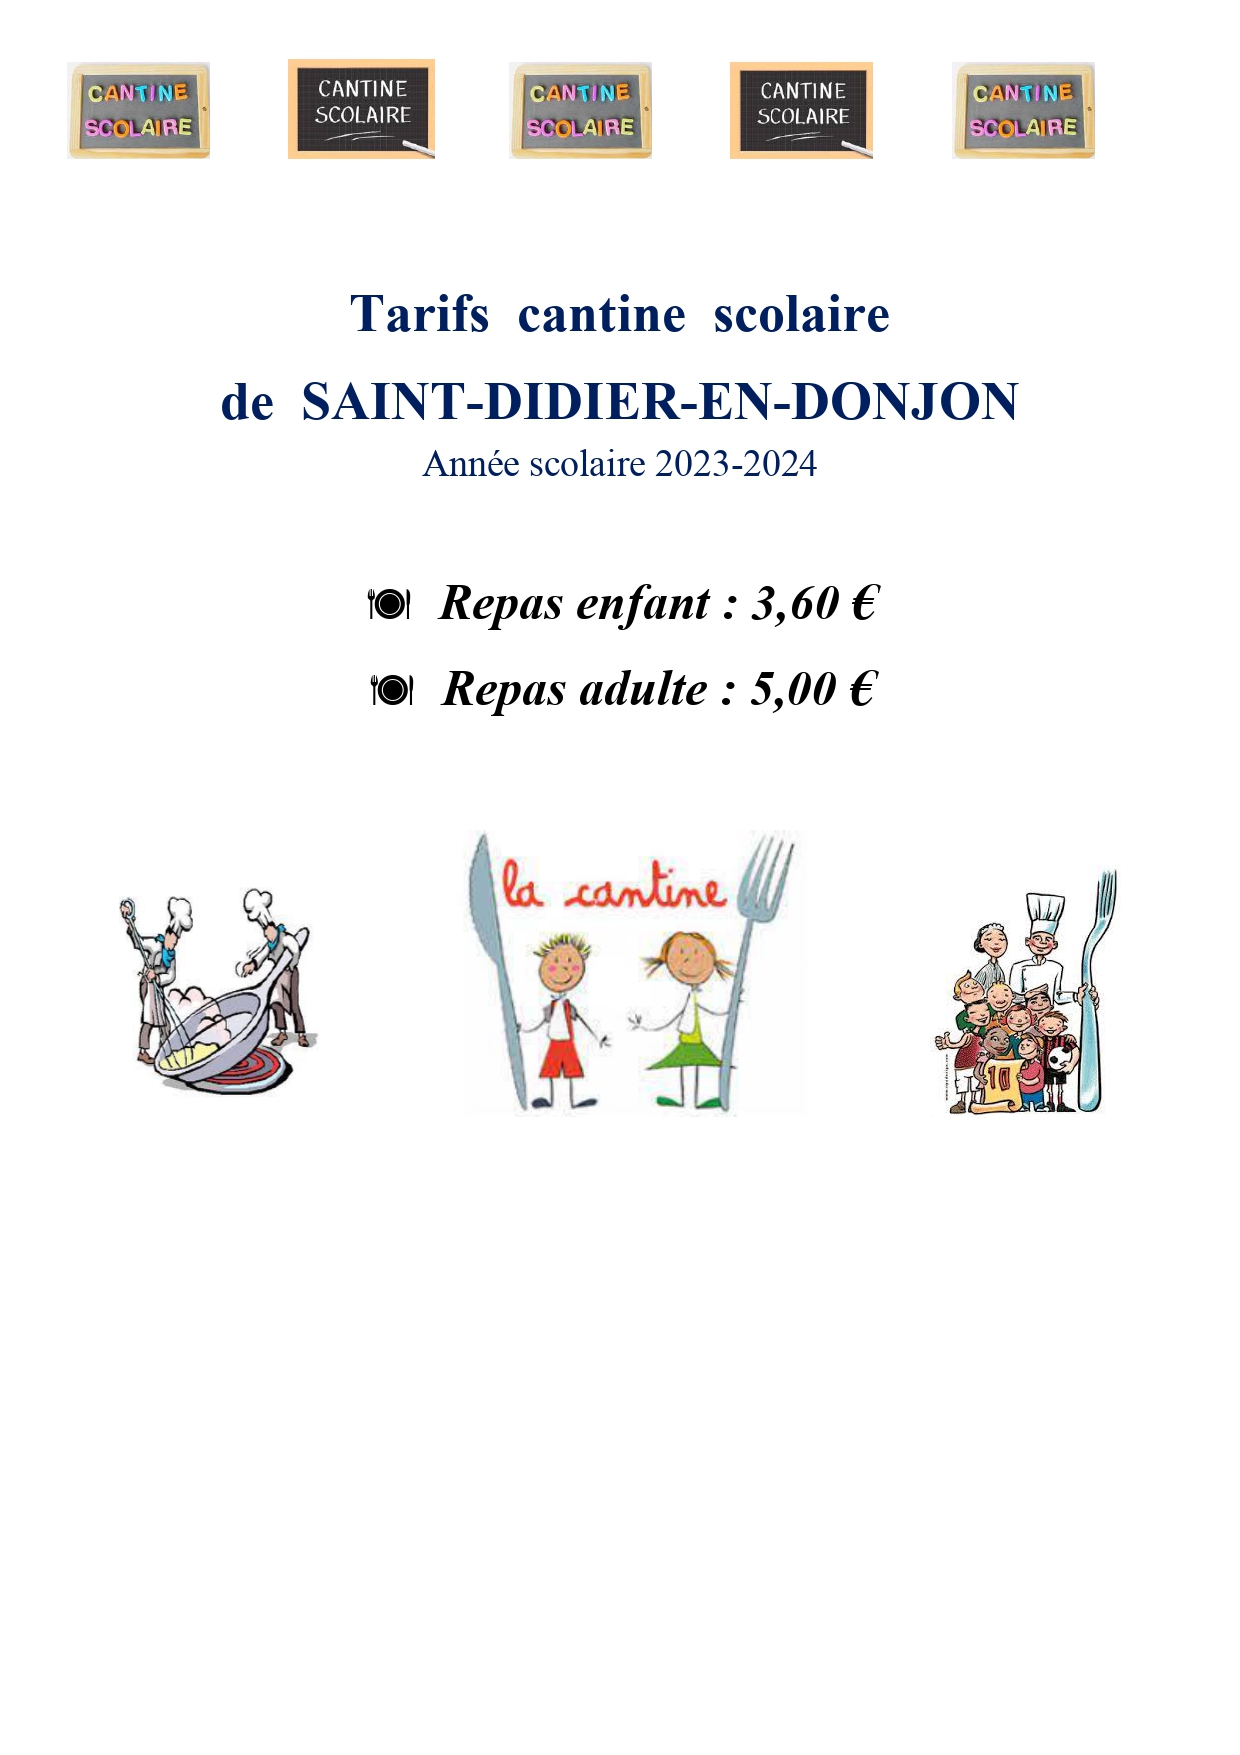 Tarifs cantine scolaire rentree 2023